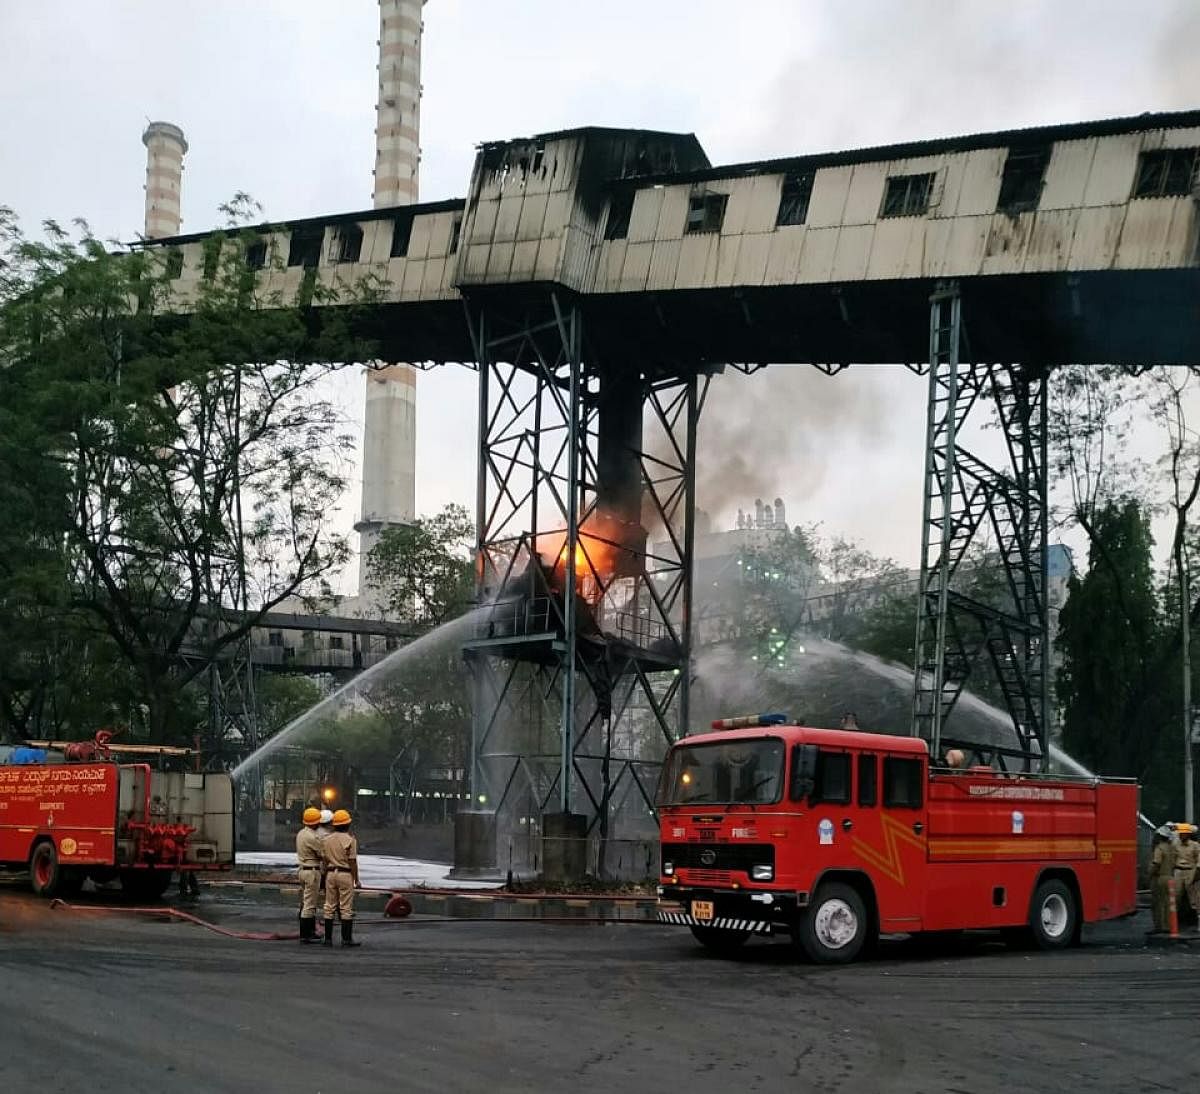 Fire and Emergency Services Department personnel extinguish the fire which broke out in a conveyor belt in the coal section of RTPS at Shakthinagar, Raichur. DH photo